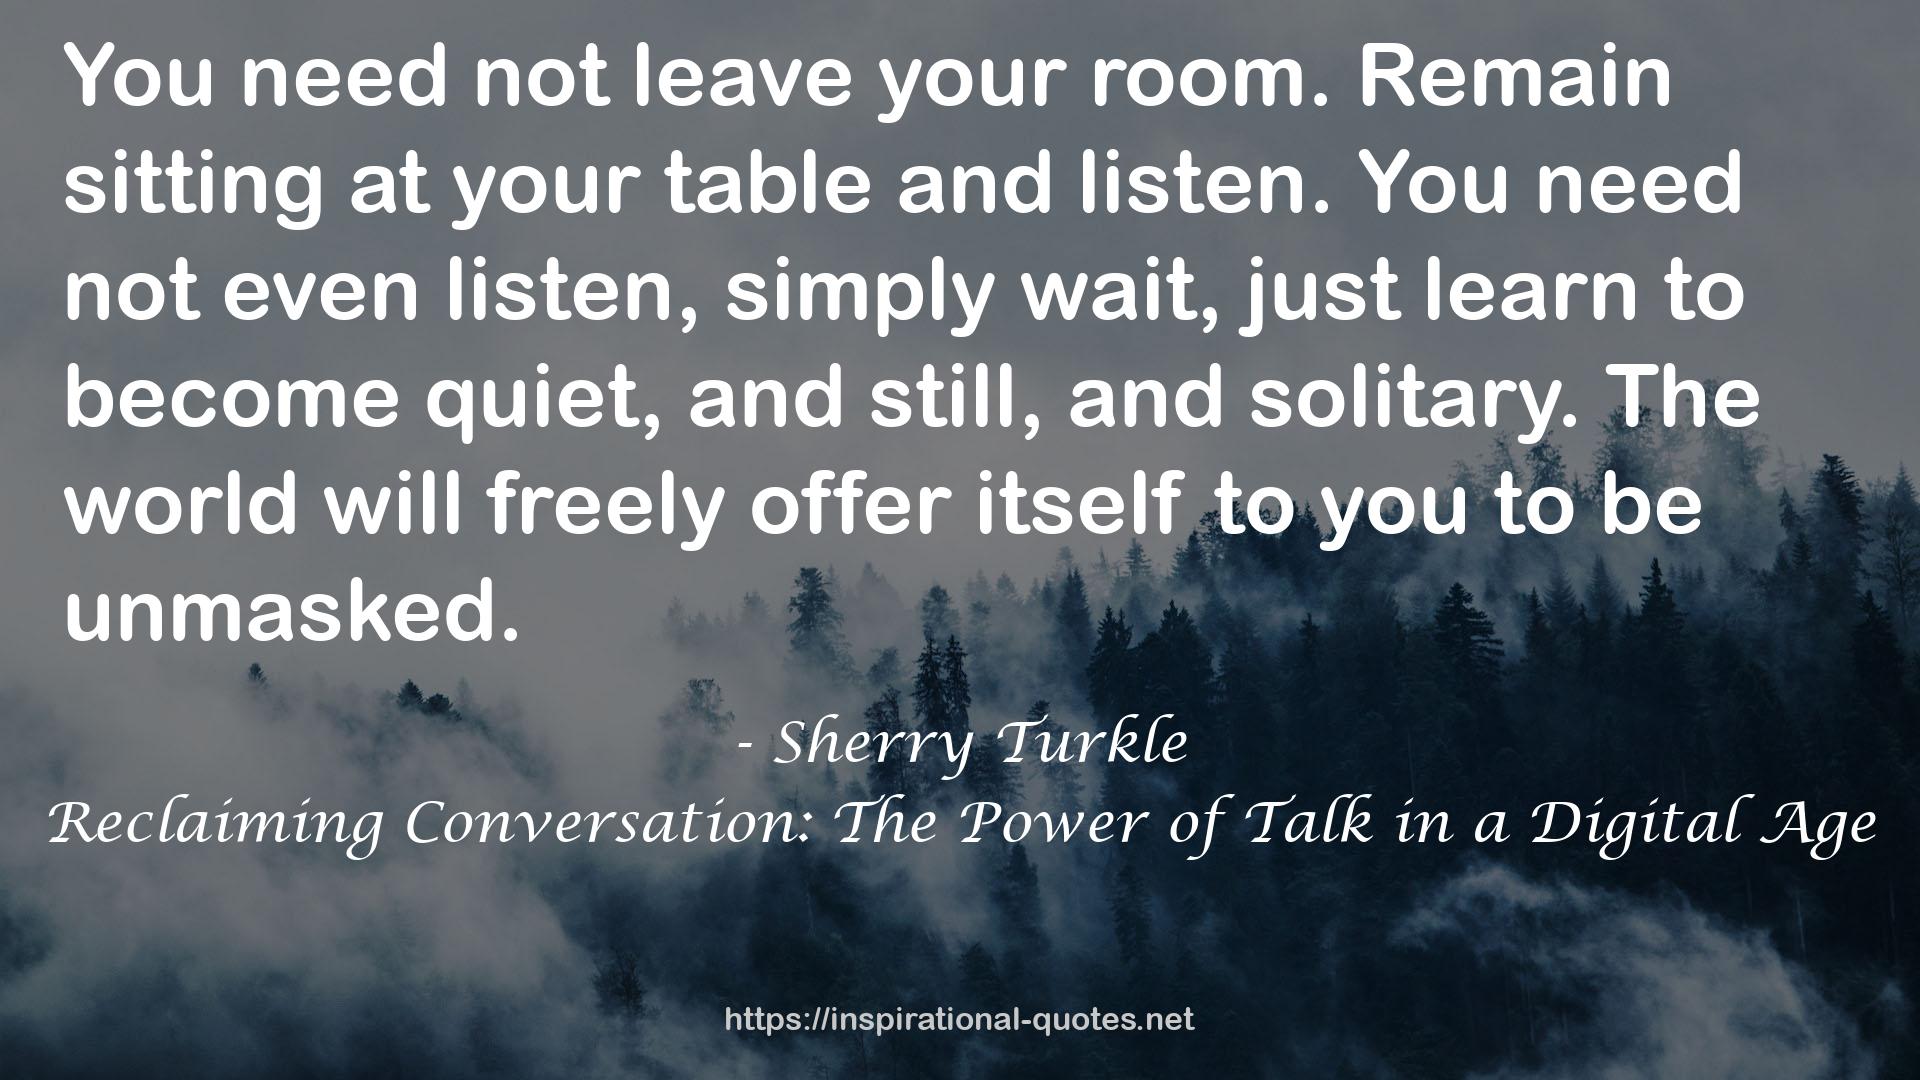 Reclaiming Conversation: The Power of Talk in a Digital Age QUOTES